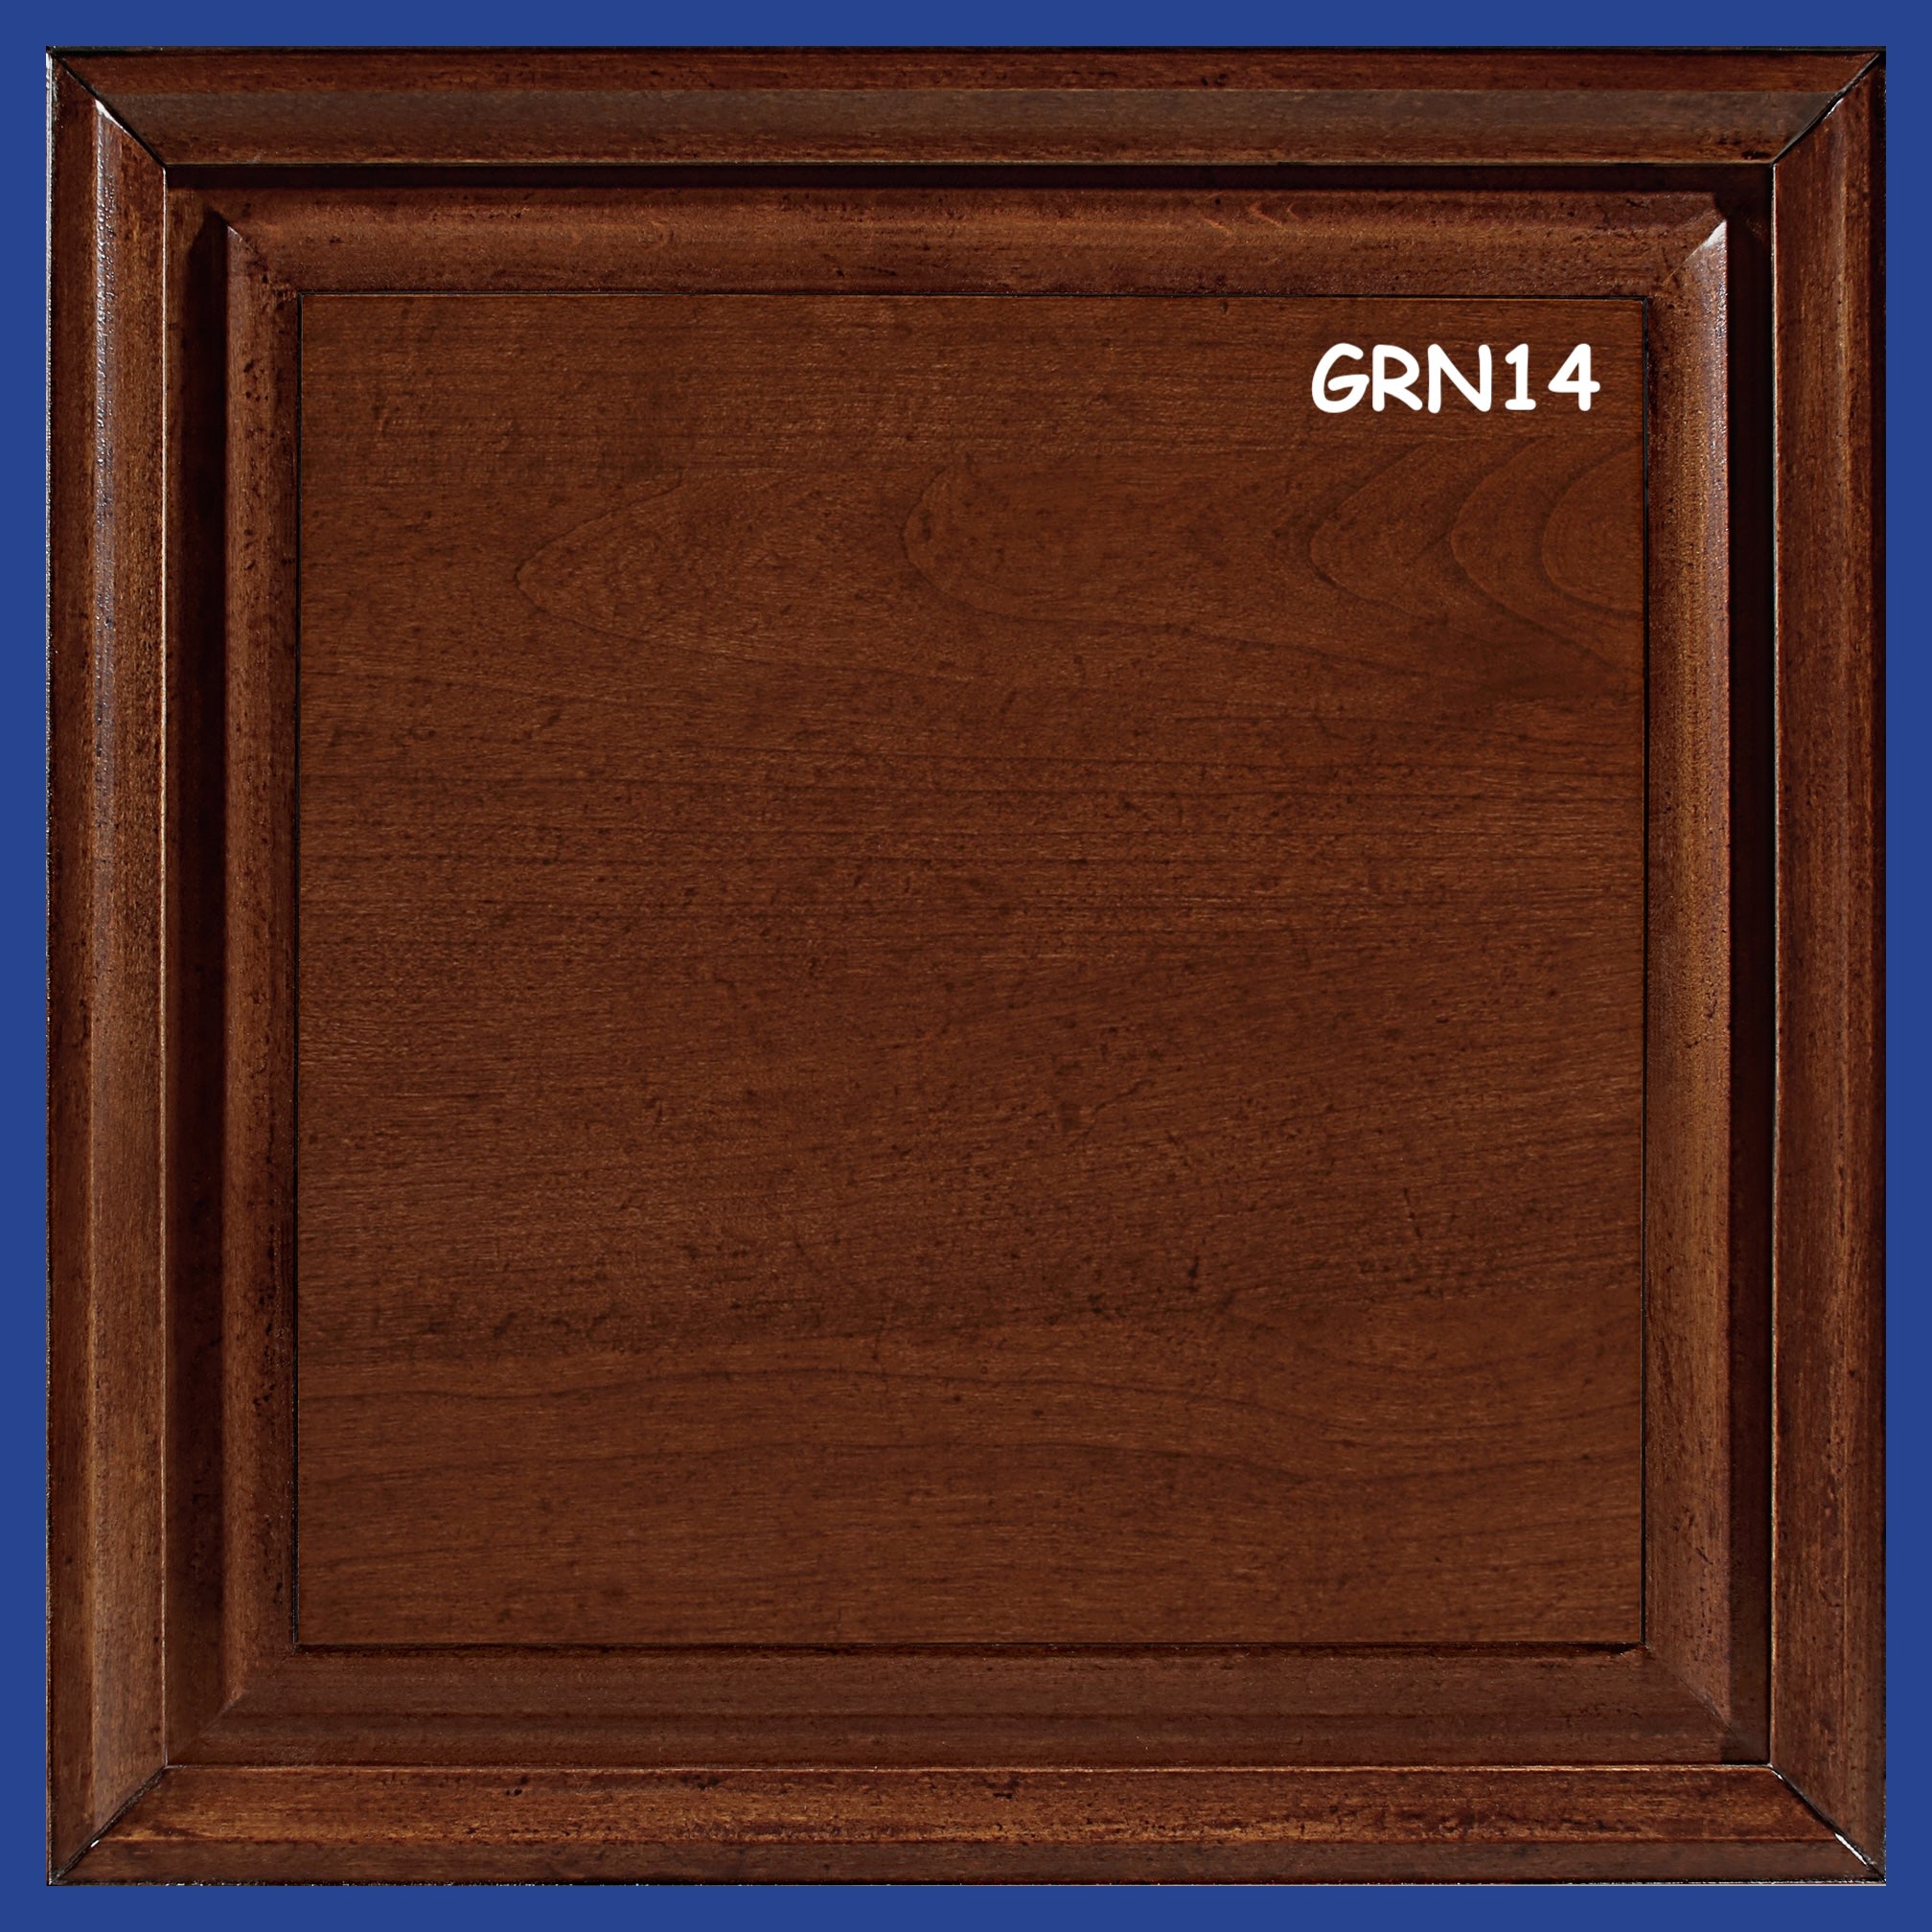 Complete Classic Double Bedroom in Cherry Wood Finish Art of Anjou Collection Piombini Mirror as a Gift 